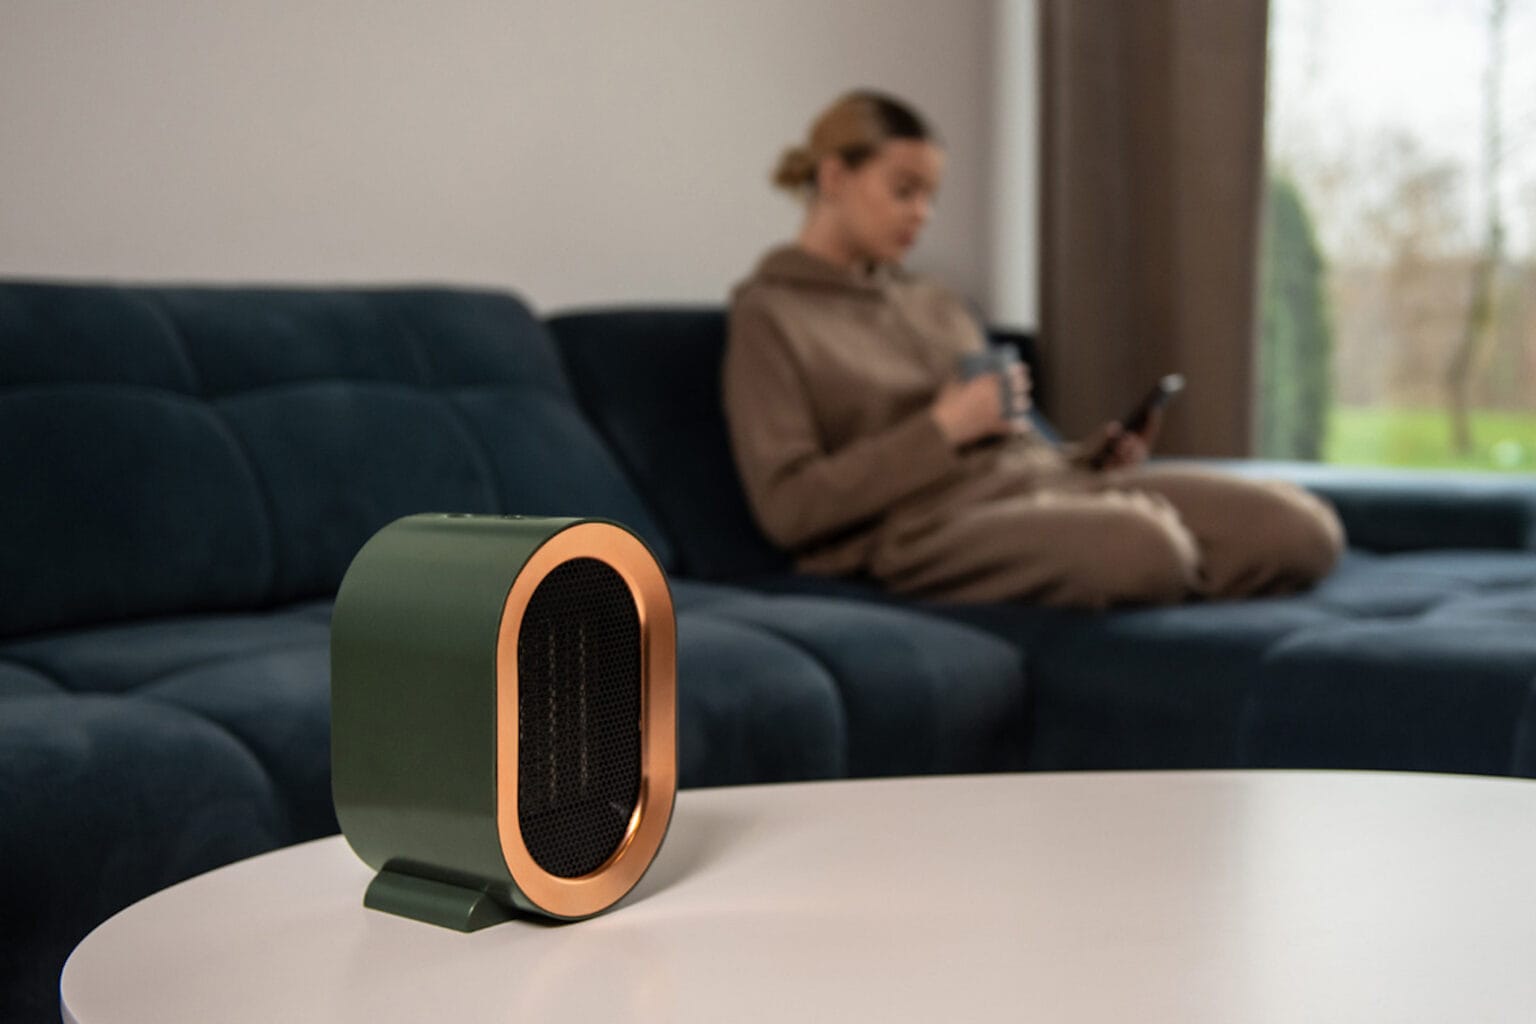 Keep your loved ones warm with the stylish FARA space heater, now under $74.